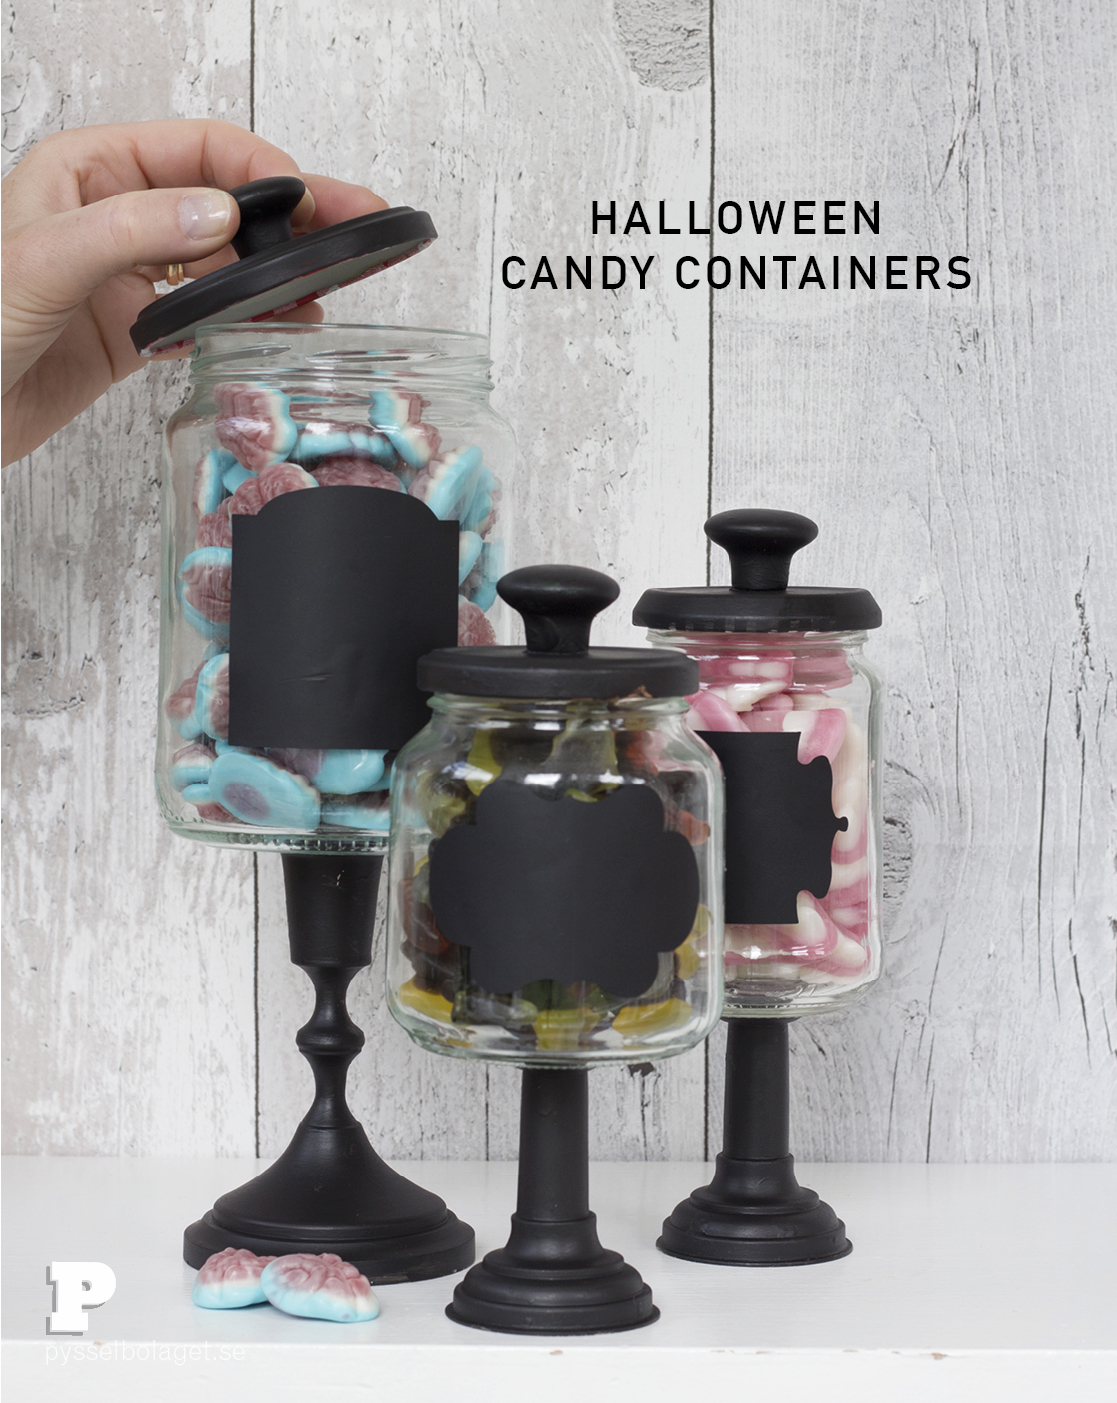 Halloween Candy Containers by Pysselbolaget